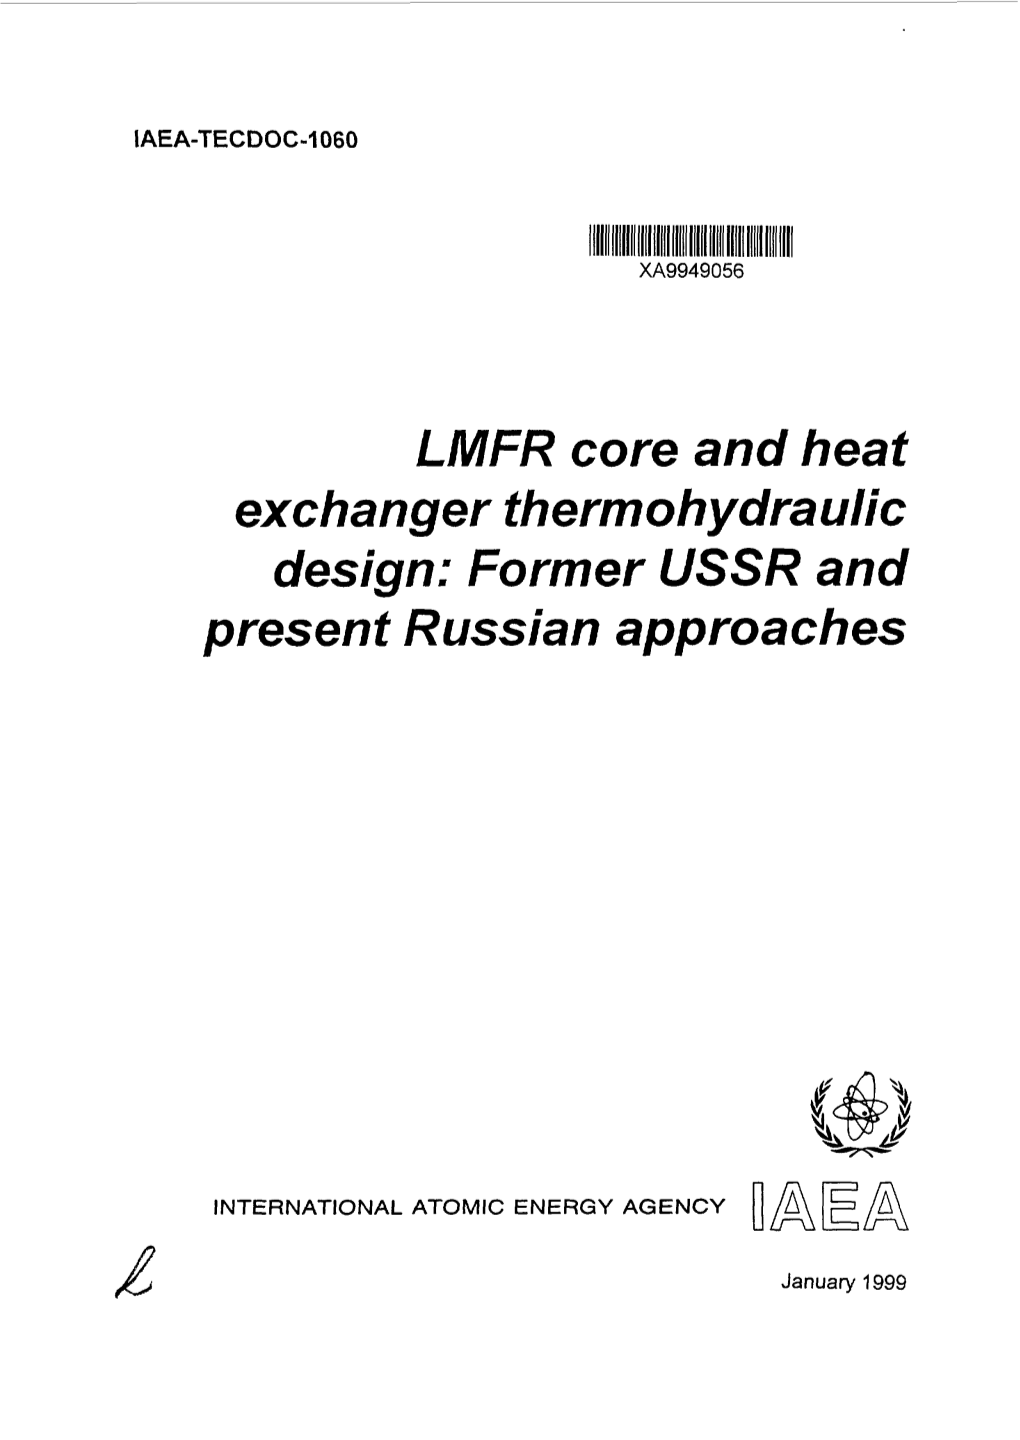 Exchanger Thermohydraulic Design: Former USSR and Present Russian Approaches